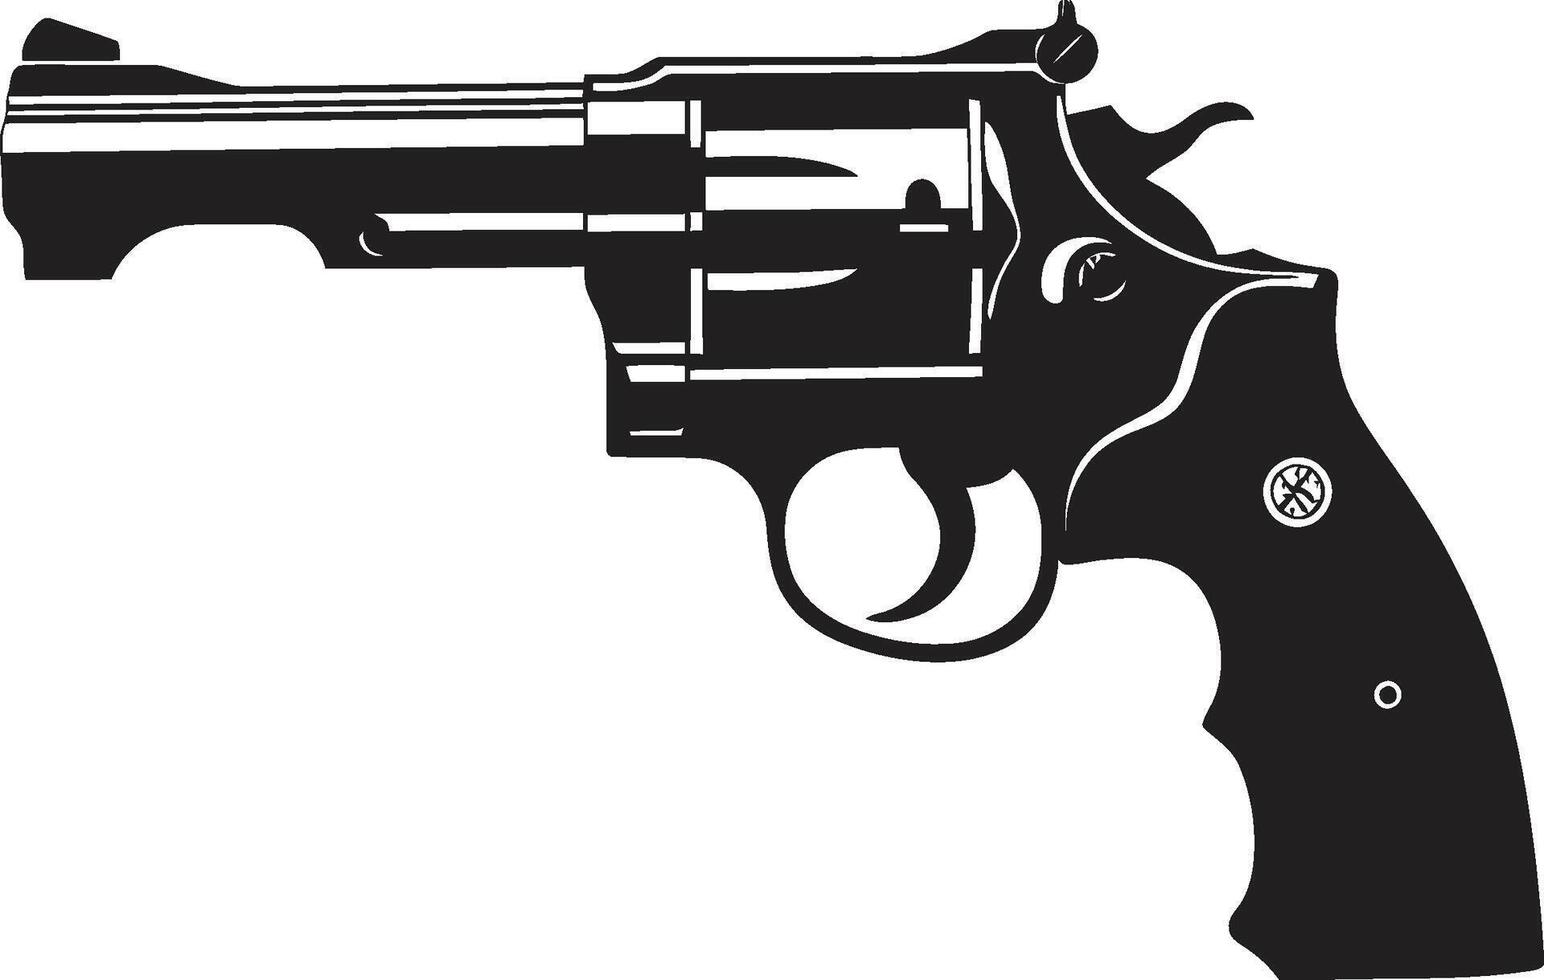 Fashioned for Force Crest Chic Revolver Icon for Impactful Branding Trendsetting Trigger Badge Modern Revolver Design for Iconic Style vector